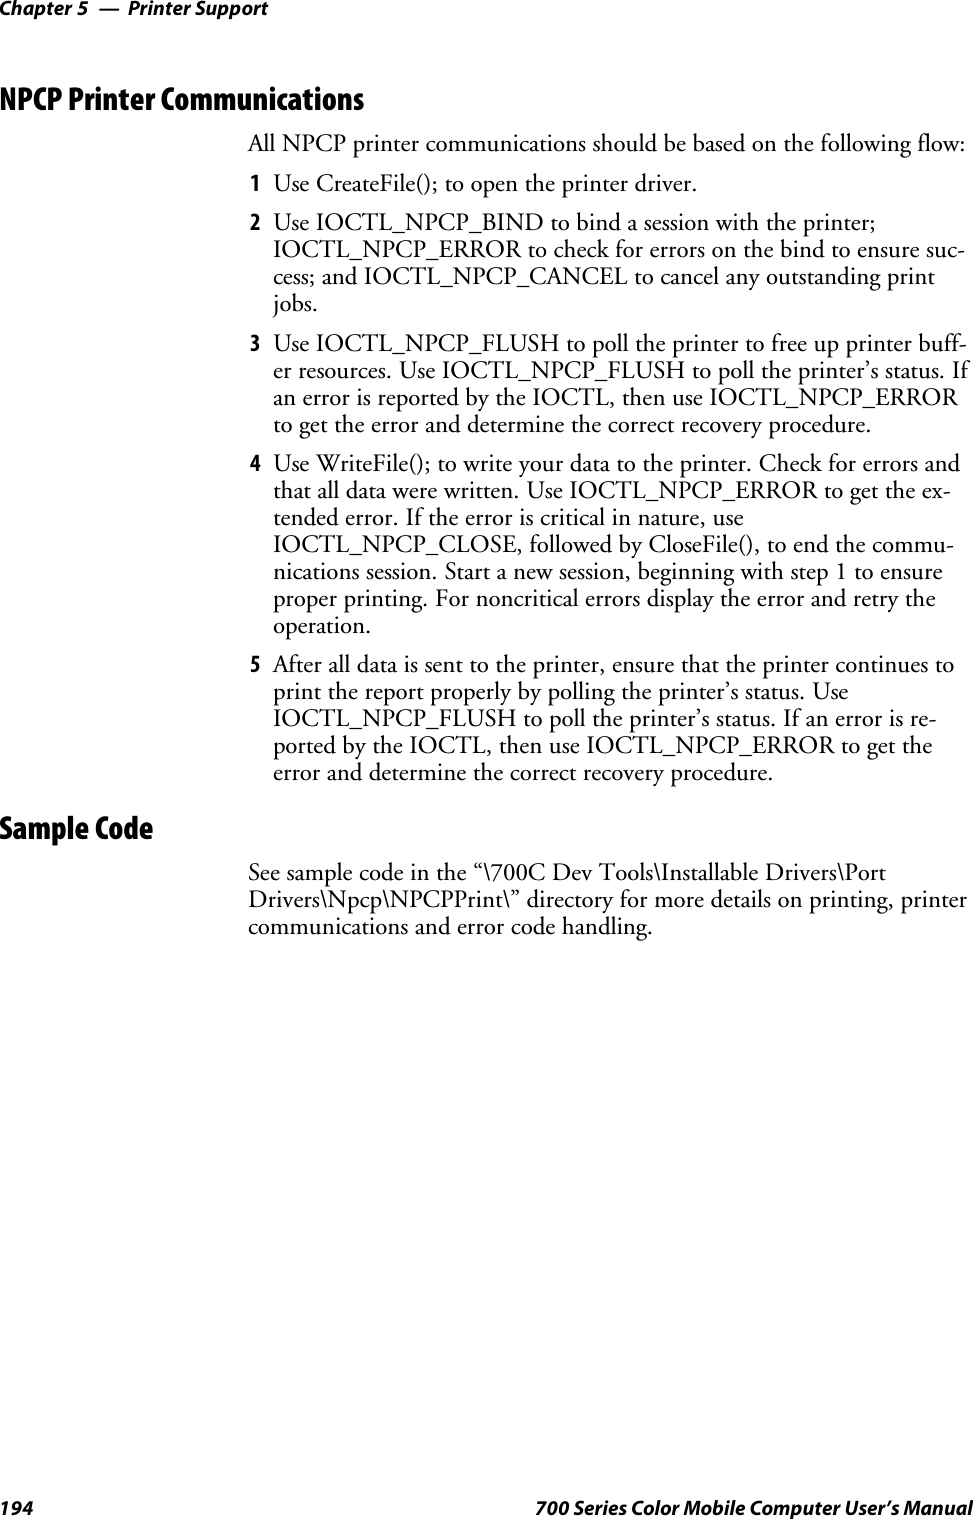 Printer SupportChapter —5194 700 Series Color Mobile Computer User’s ManualNPCP Printer CommunicationsAll NPCP printer communications should be based on the following flow:1Use CreateFile(); to open the printer driver.2Use IOCTL_NPCP_BIND to bind a session with the printer;IOCTL_NPCP_ERROR to check for errors on the bind to ensure suc-cess; and IOCTL_NPCP_CANCEL to cancel any outstanding printjobs.3Use IOCTL_NPCP_FLUSH to poll the printer to free up printer buff-er resources. Use IOCTL_NPCP_FLUSH to poll the printer’s status. Ifan error is reported by the IOCTL, then use IOCTL_NPCP_ERRORto get the error and determine the correct recovery procedure.4Use WriteFile(); to write your data to the printer. Check for errors andthat all data were written. Use IOCTL_NPCP_ERROR to get the ex-tended error. If the error is critical in nature, useIOCTL_NPCP_CLOSE, followed by CloseFile(), to end the commu-nications session. Start a new session, beginning with step 1 to ensureproper printing. For noncritical errors display the error and retry theoperation.5After all data is sent to the printer, ensure that the printer continues toprint the report properly by polling the printer’s status. UseIOCTL_NPCP_FLUSH to poll the printer’s status. If an error is re-ported by the IOCTL, then use IOCTL_NPCP_ERROR to get theerror and determine the correct recovery procedure.Sample CodeSee sample code in the “\700C Dev Tools\Installable Drivers\PortDrivers\Npcp\NPCPPrint\” directory for more details on printing, printercommunications and error code handling.